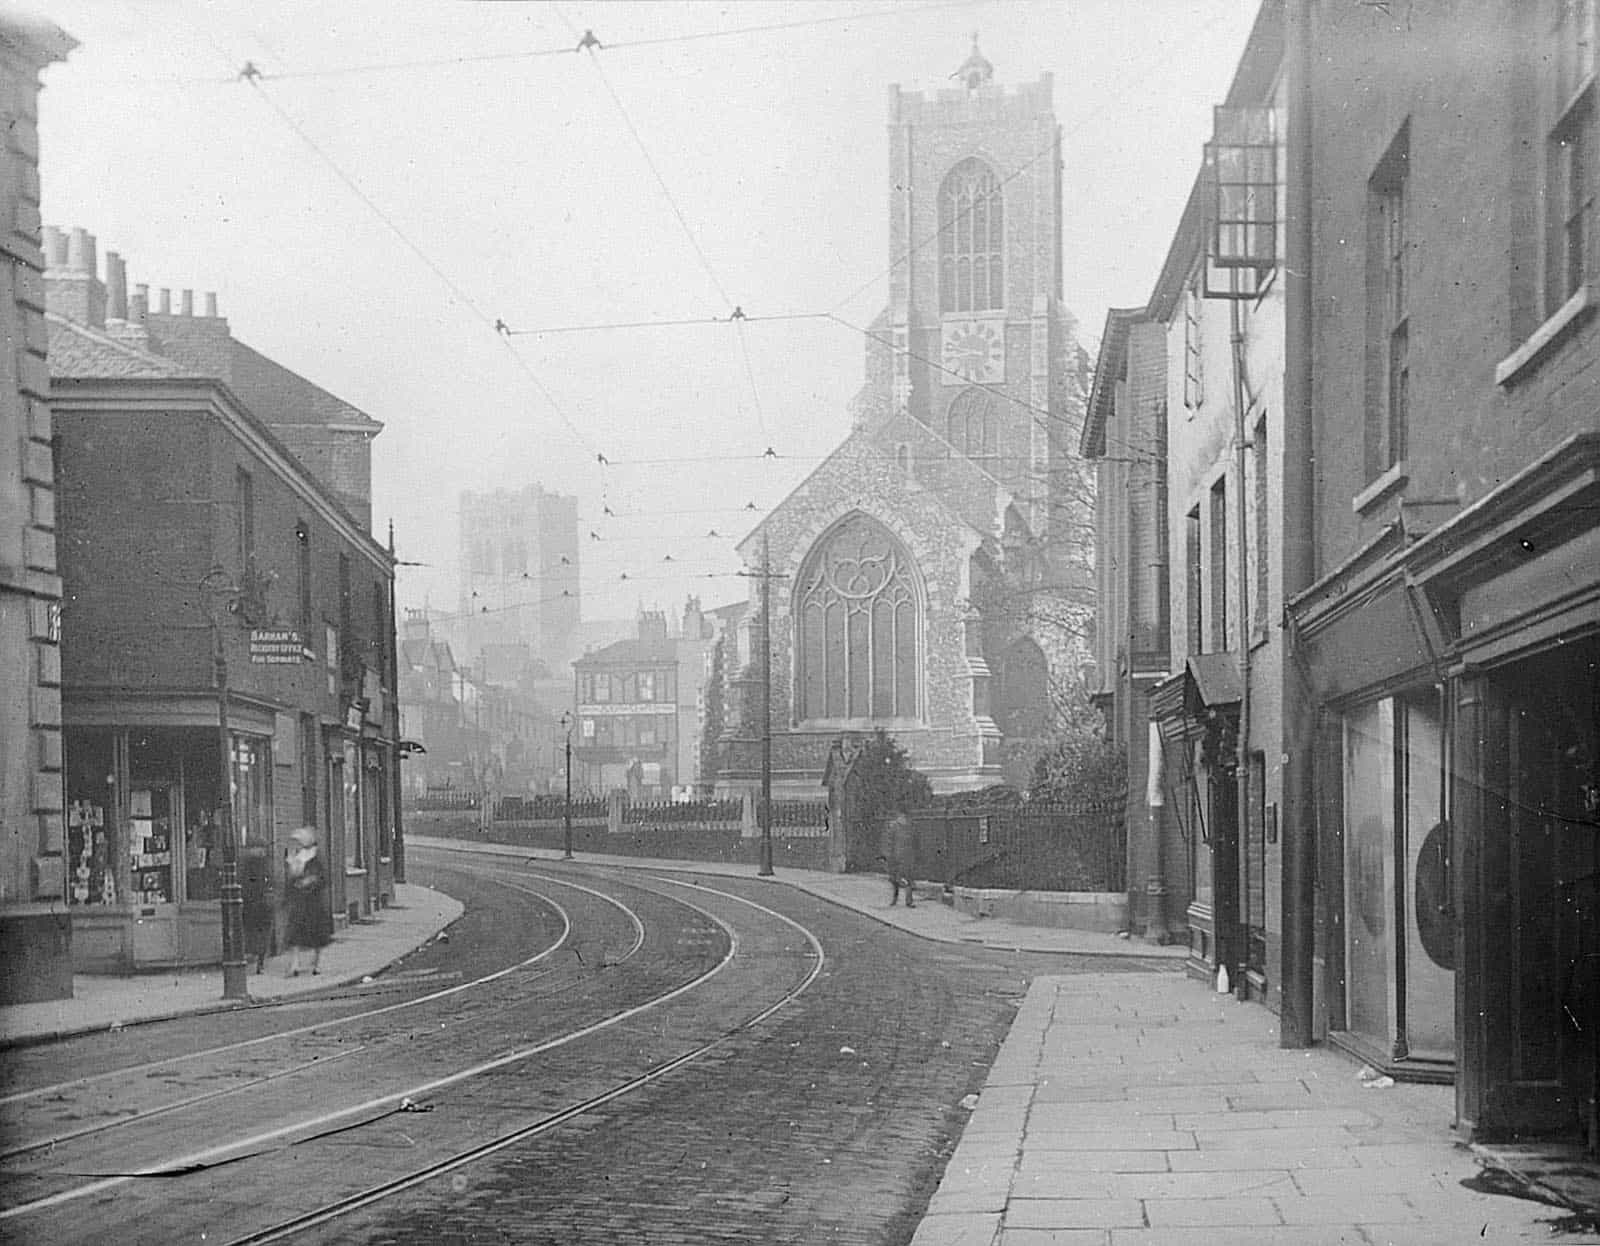 Up city: St Giles Street, Norwich